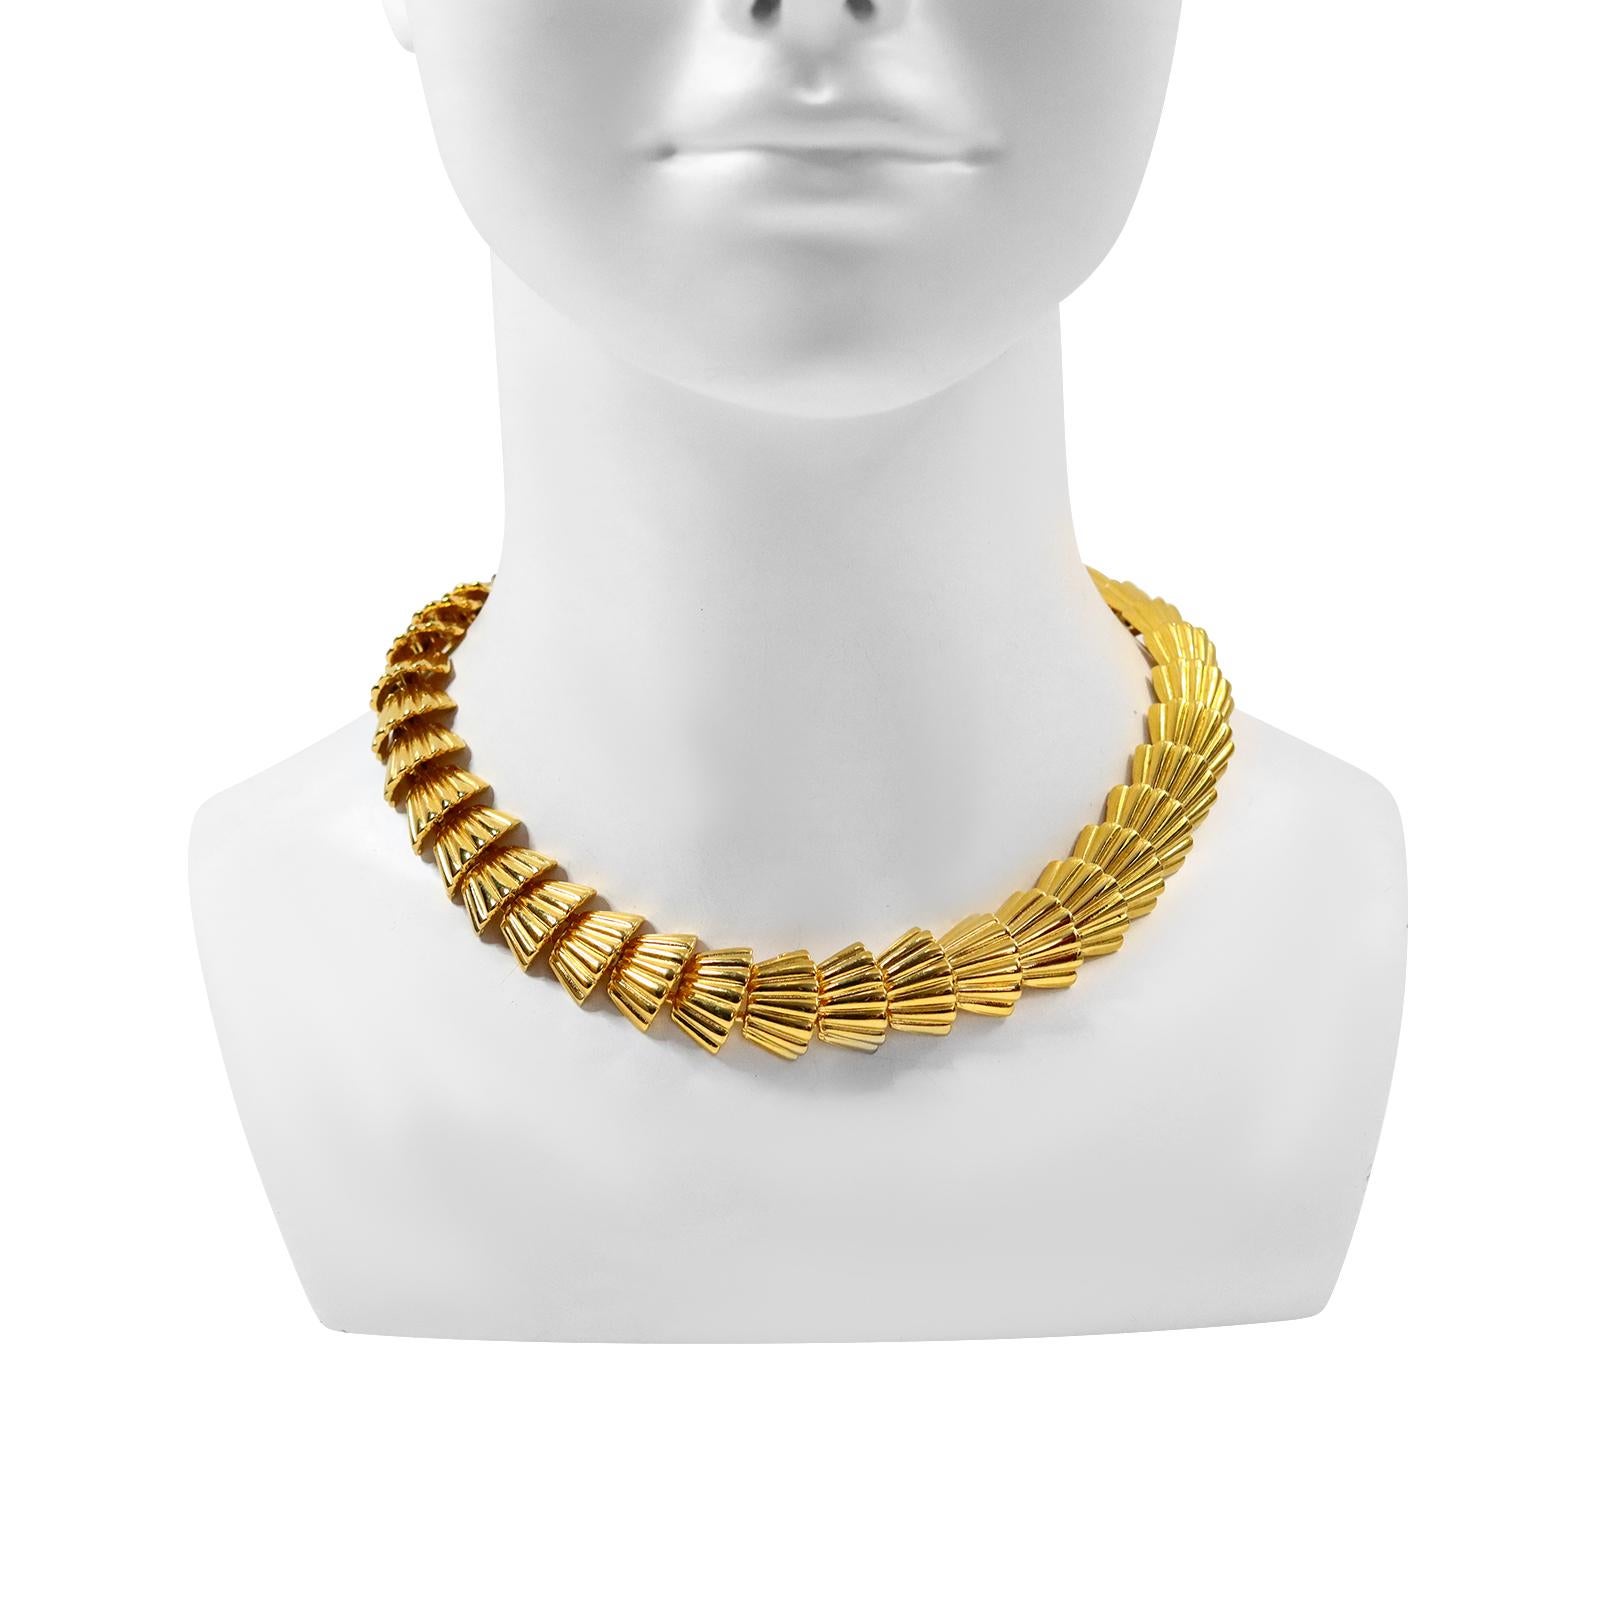 Vintage Anne Klein Stacked Gold tone Fan Like Toggle Necklace.  These are like secrets from the 1980s.  They are well made necklaces that were made during the period that are so chic.  Anne Klein jewelry was so well made and so sought after during